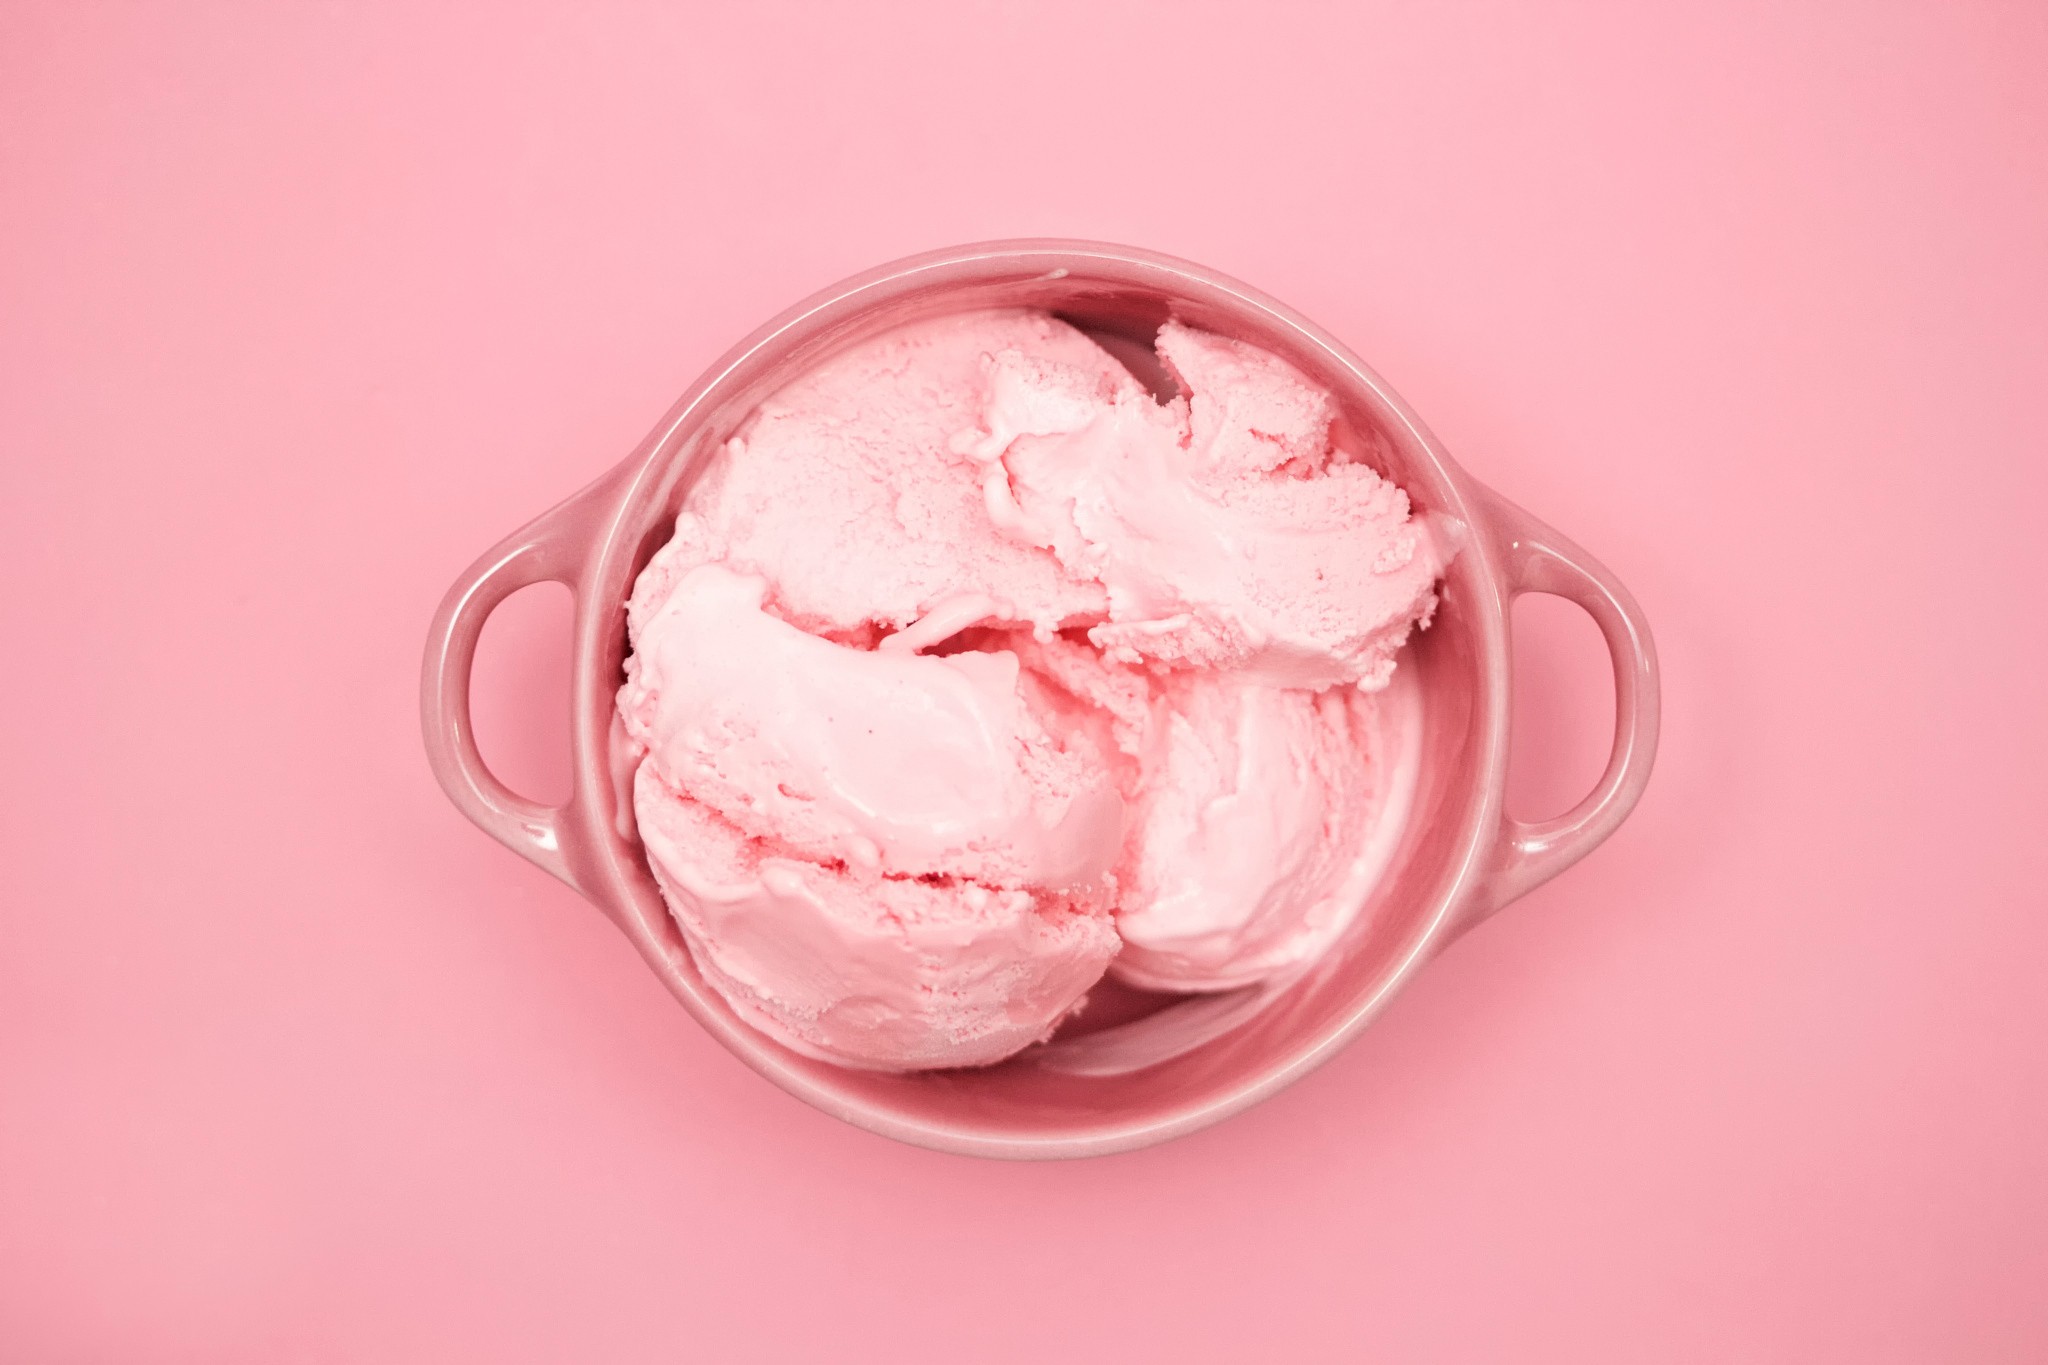 General 2048x1365 cup ice cream food pink sweets pink background simple background